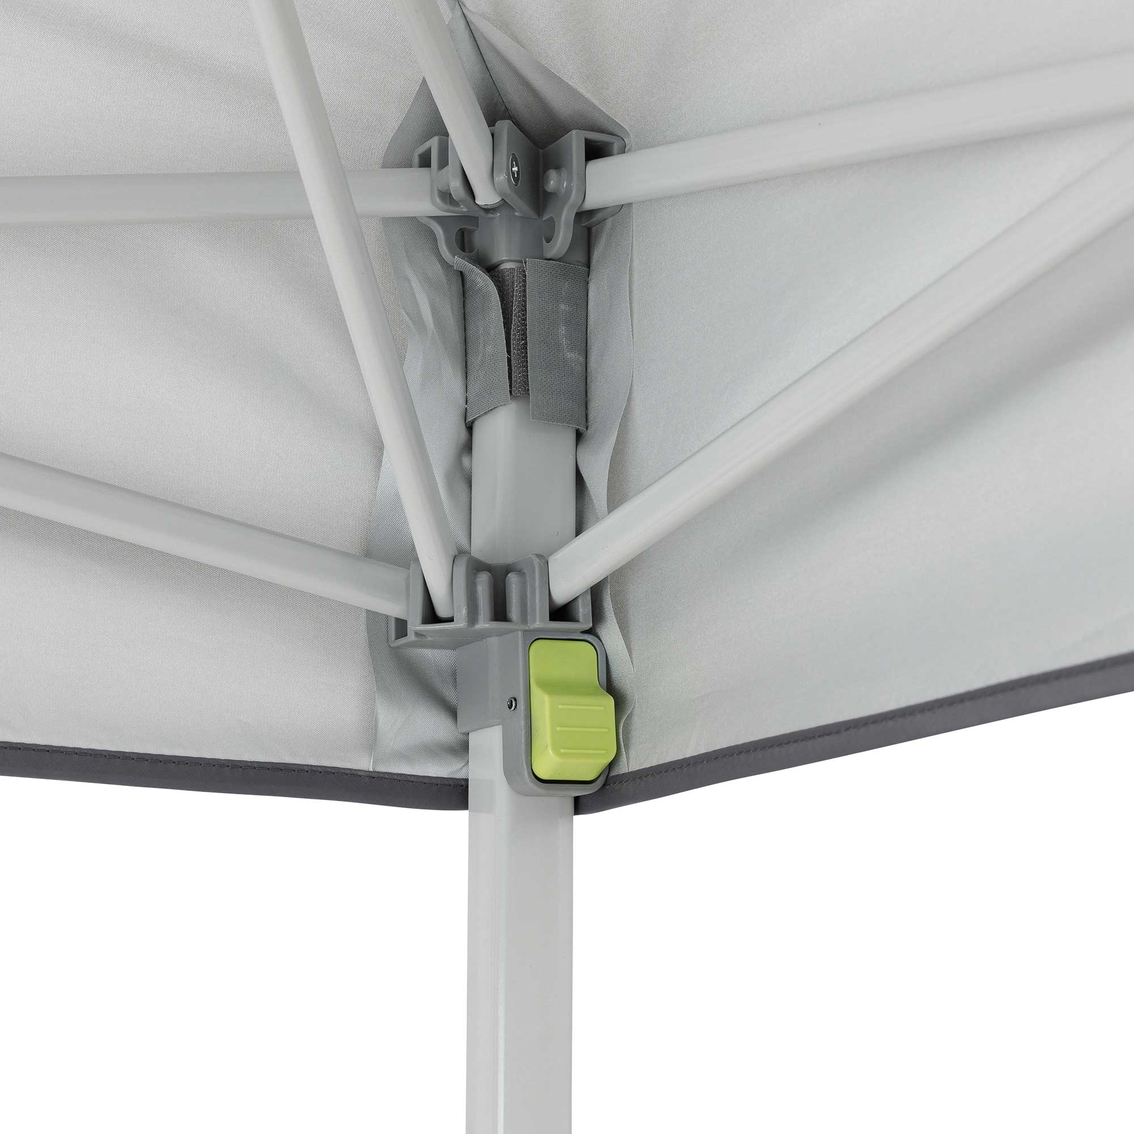 Core Equipment 8 x 8 ft. Instant Canopy - Image 4 of 6